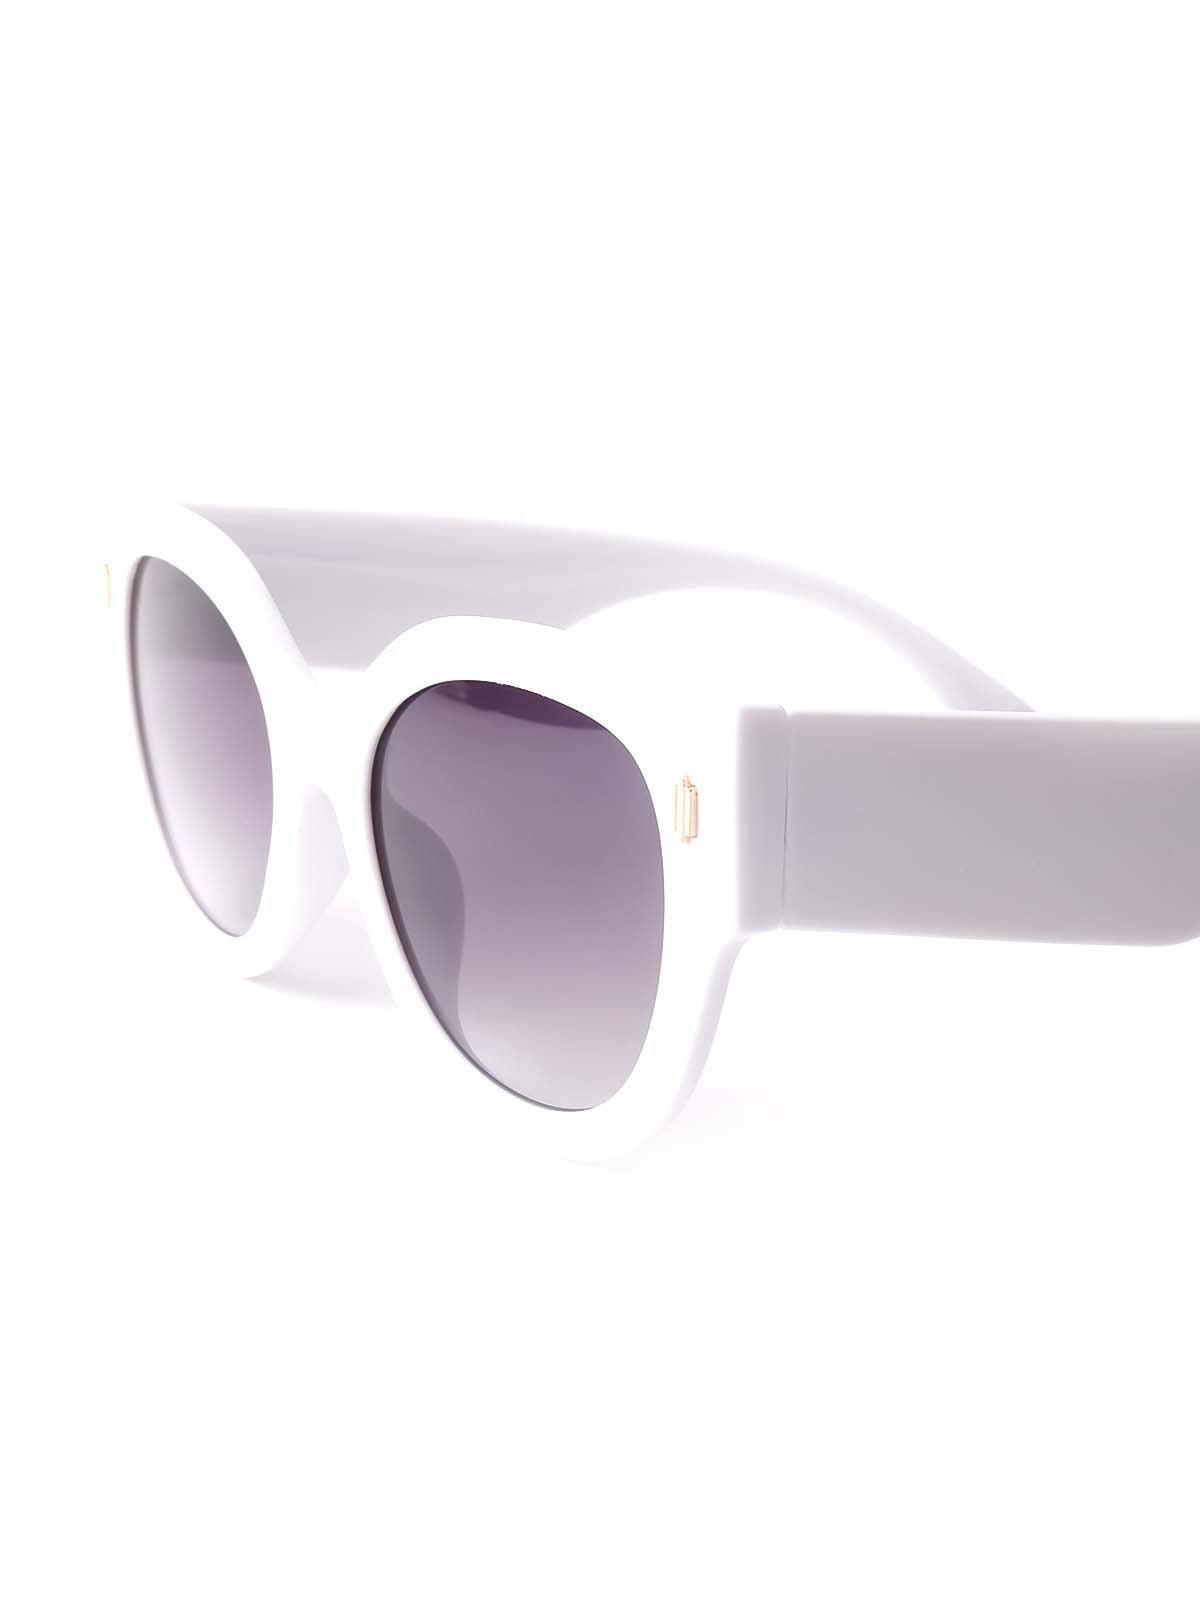 You're Good to Go Year-round with Stylish White Sunglasses - EZOnTheEyes